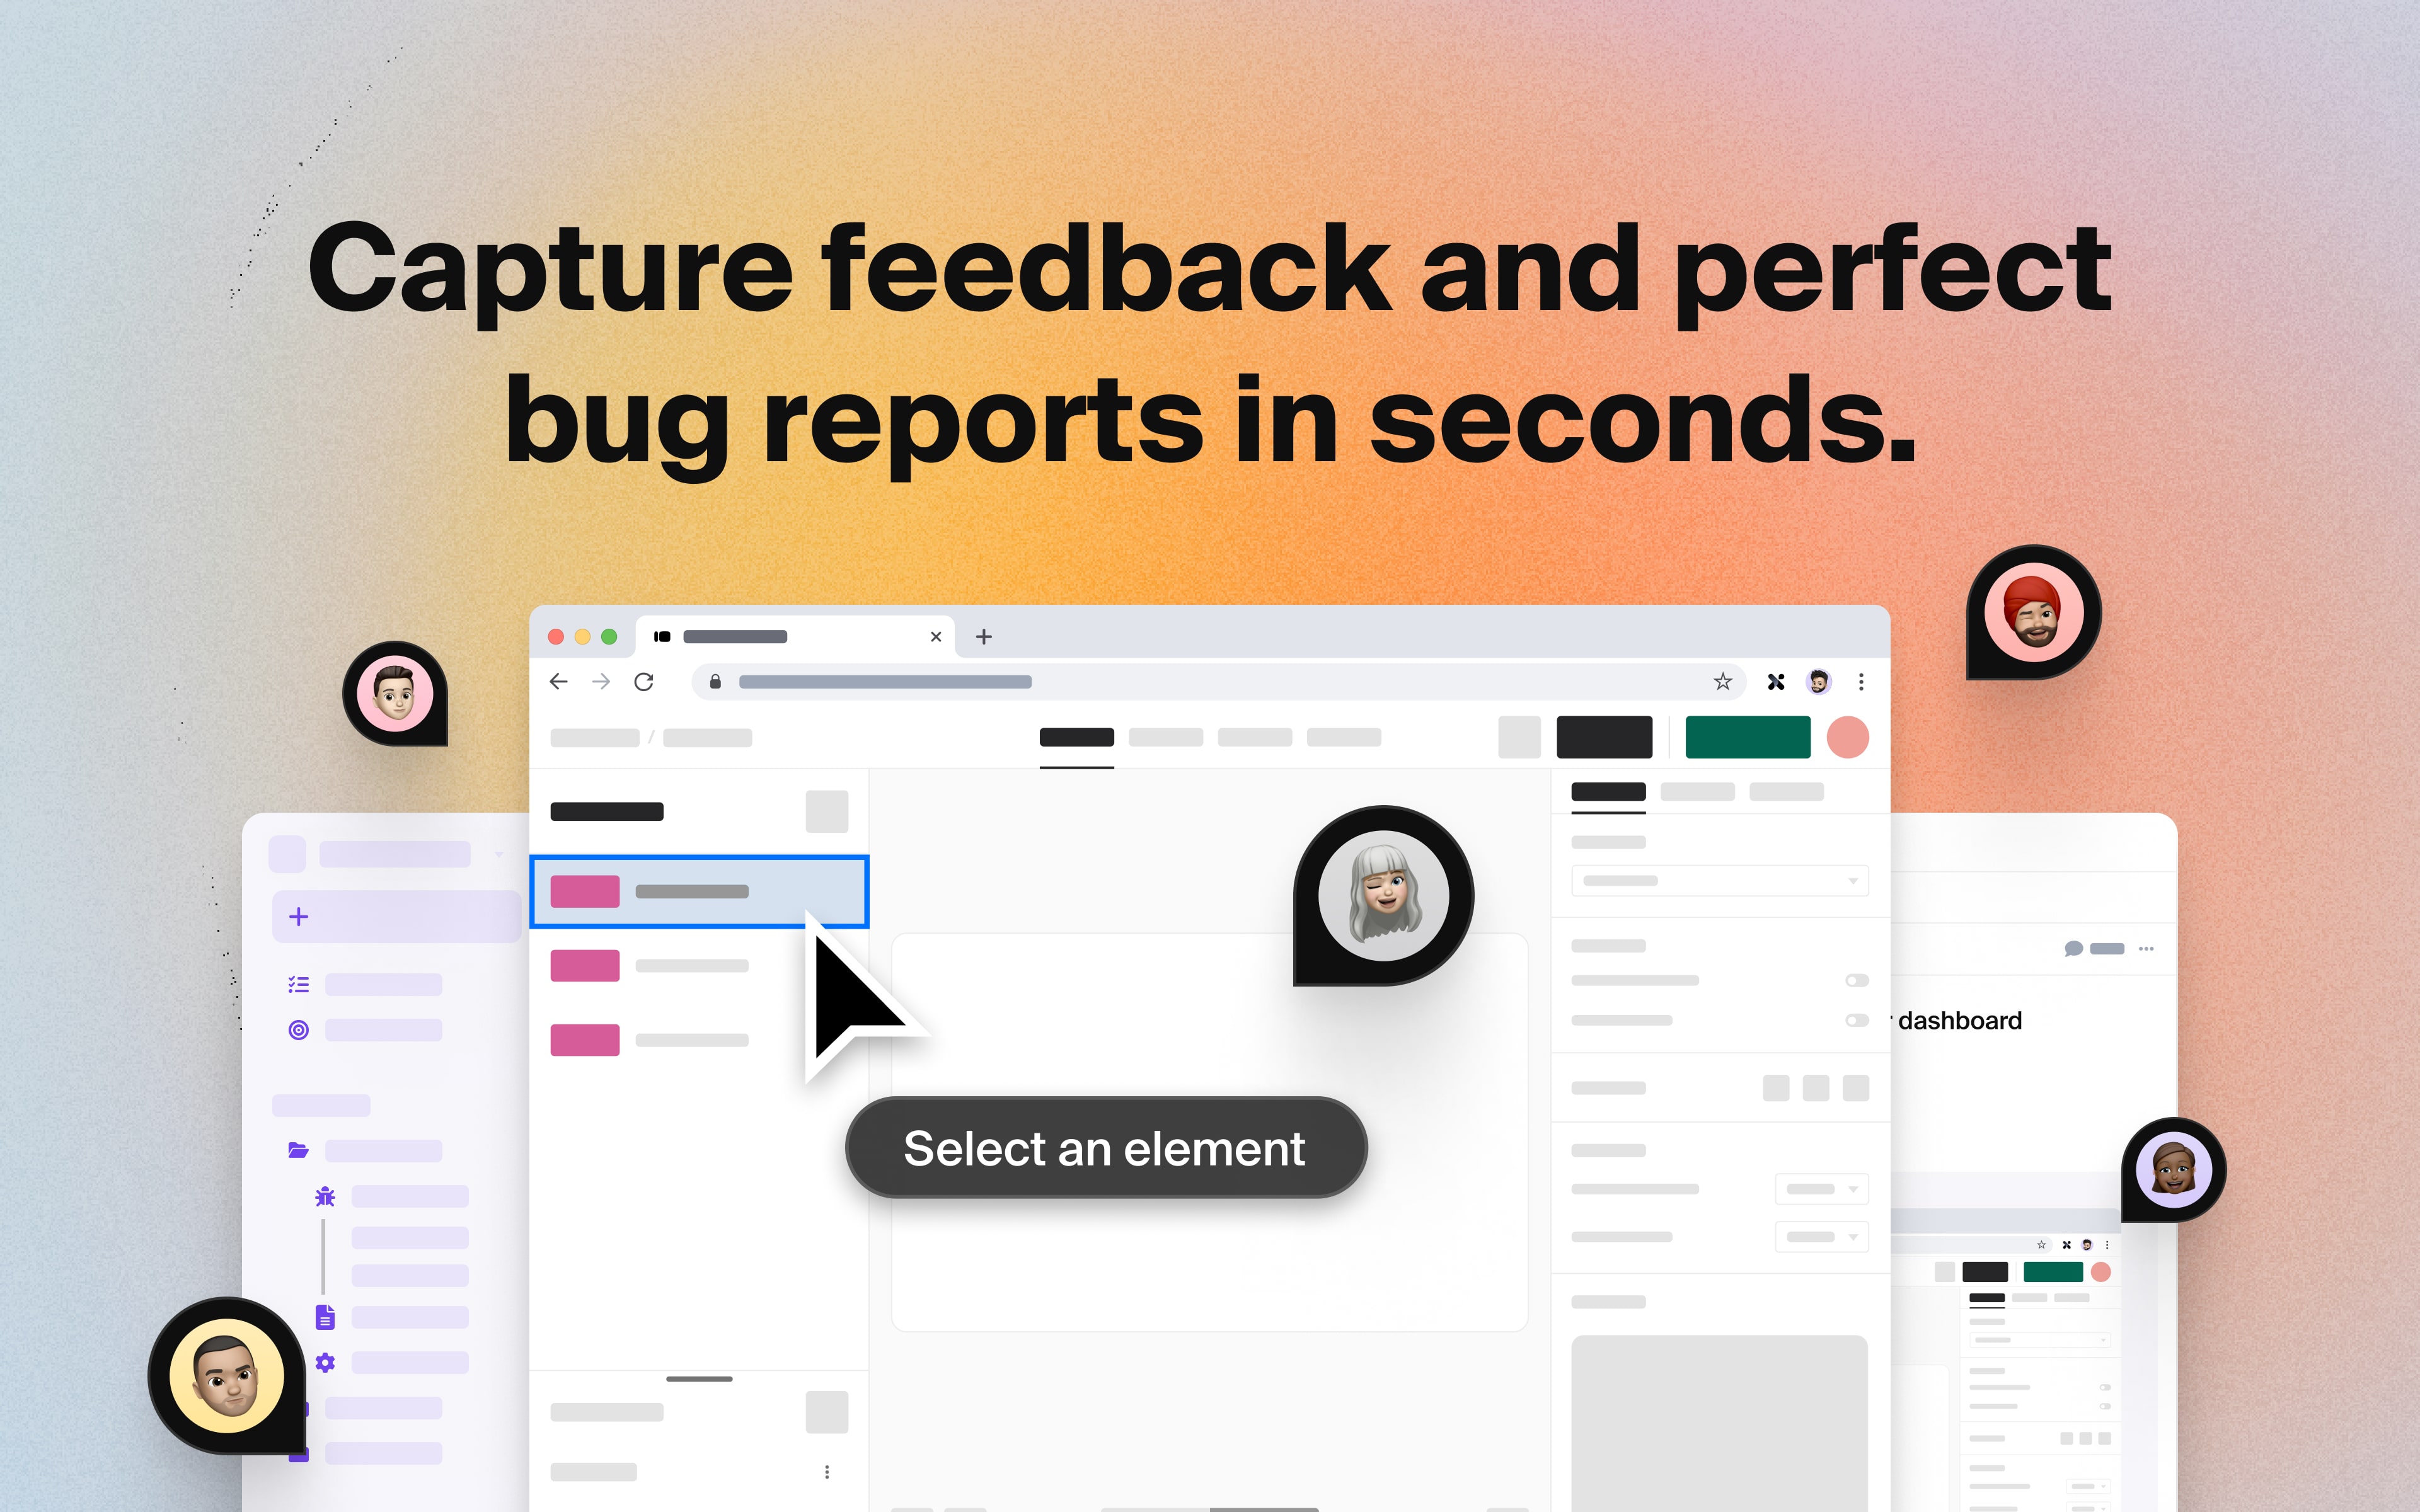 Capture feedback and perfect bug reports in seconds.